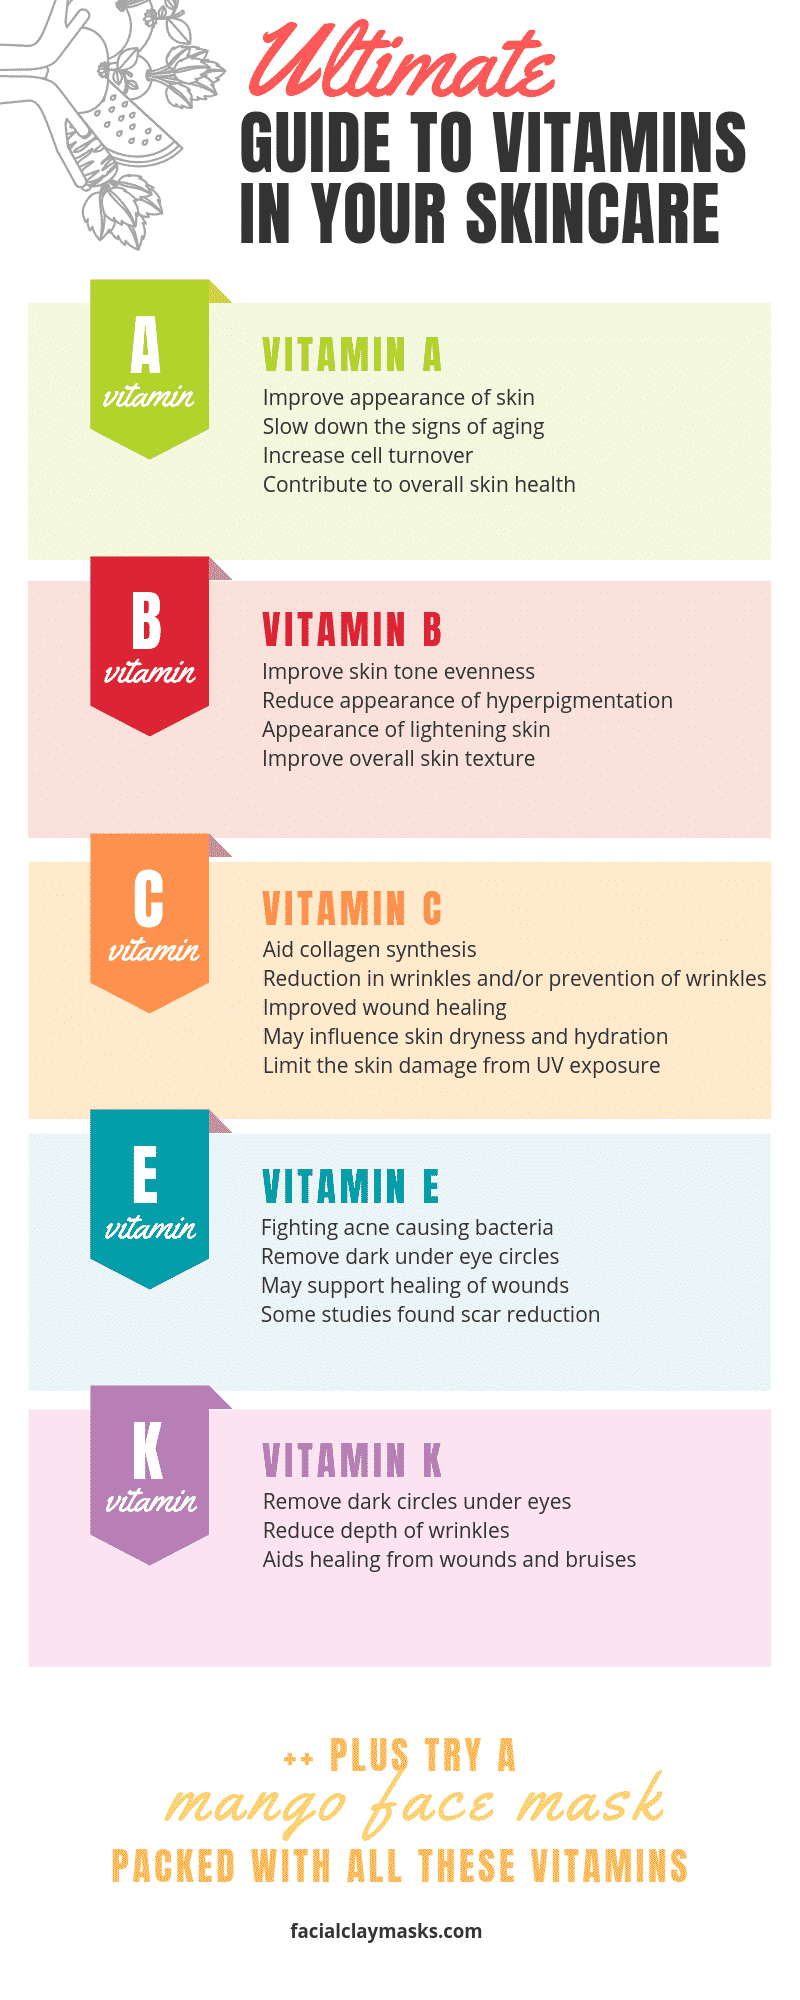 Guide to Vitamins in your Skincare